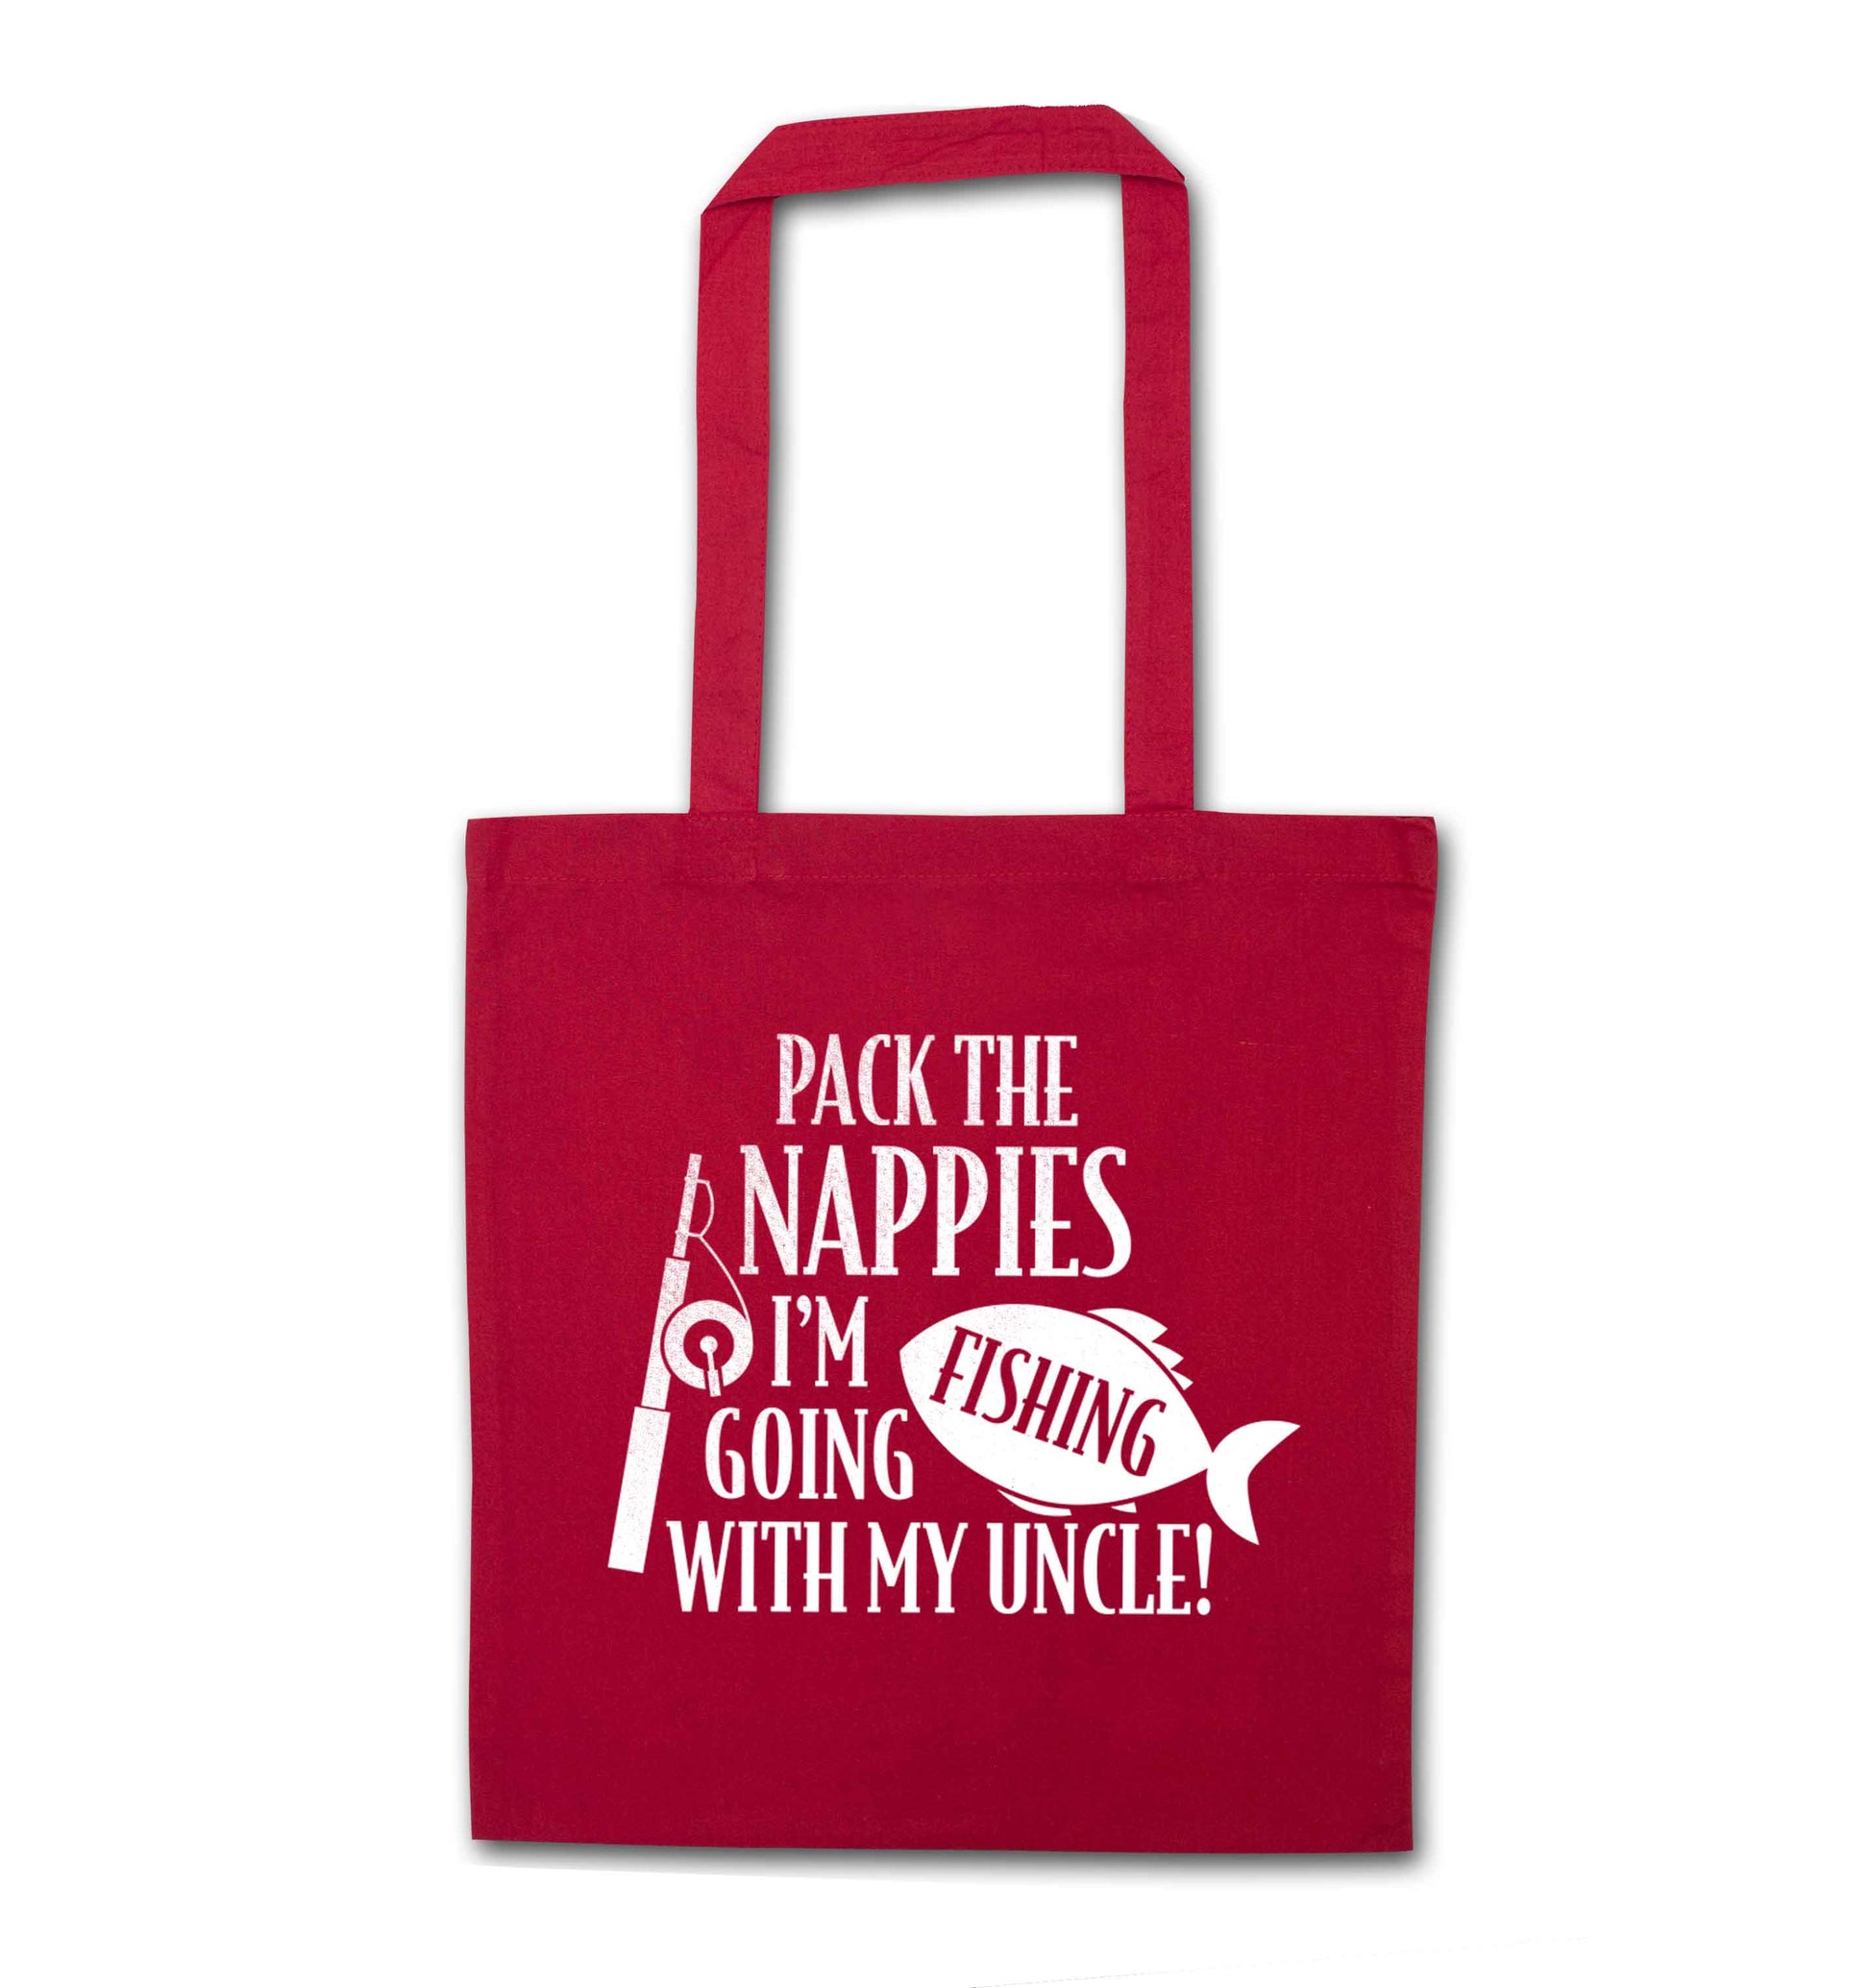 Pack the nappies I'm going fishing with my Uncle red tote bag